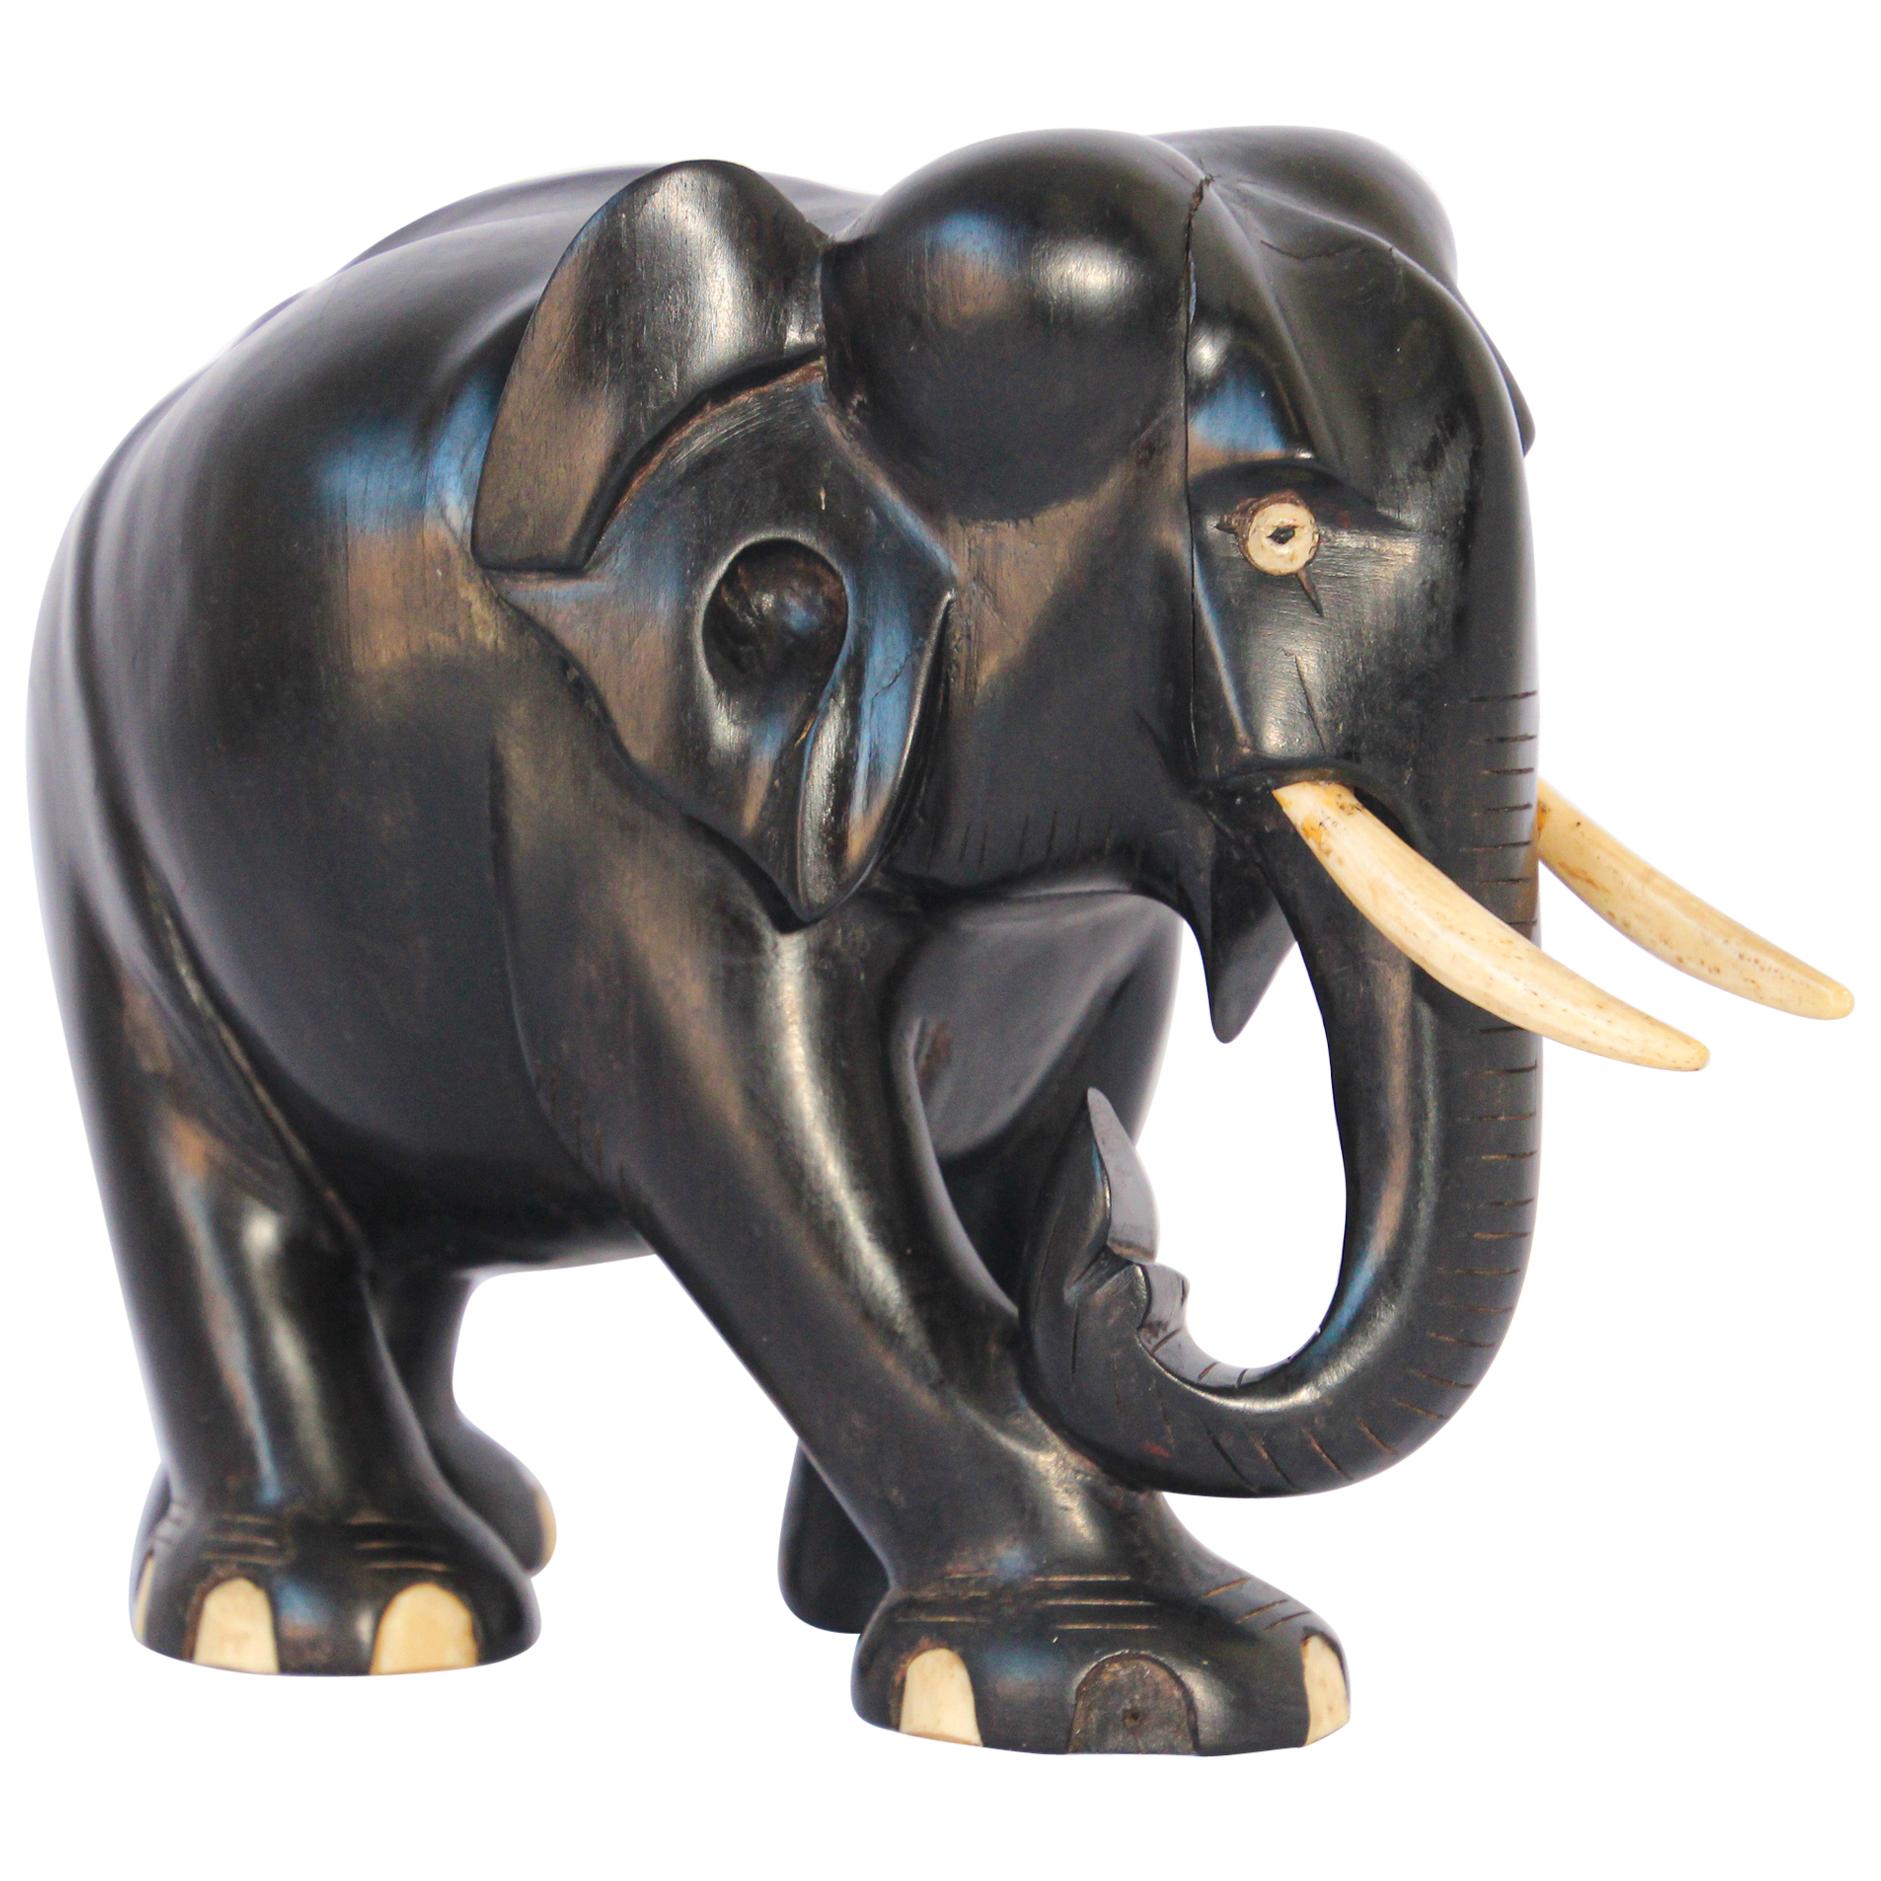 Ebony Wood Hand Carved Anglo Indian Elephant Sculpture